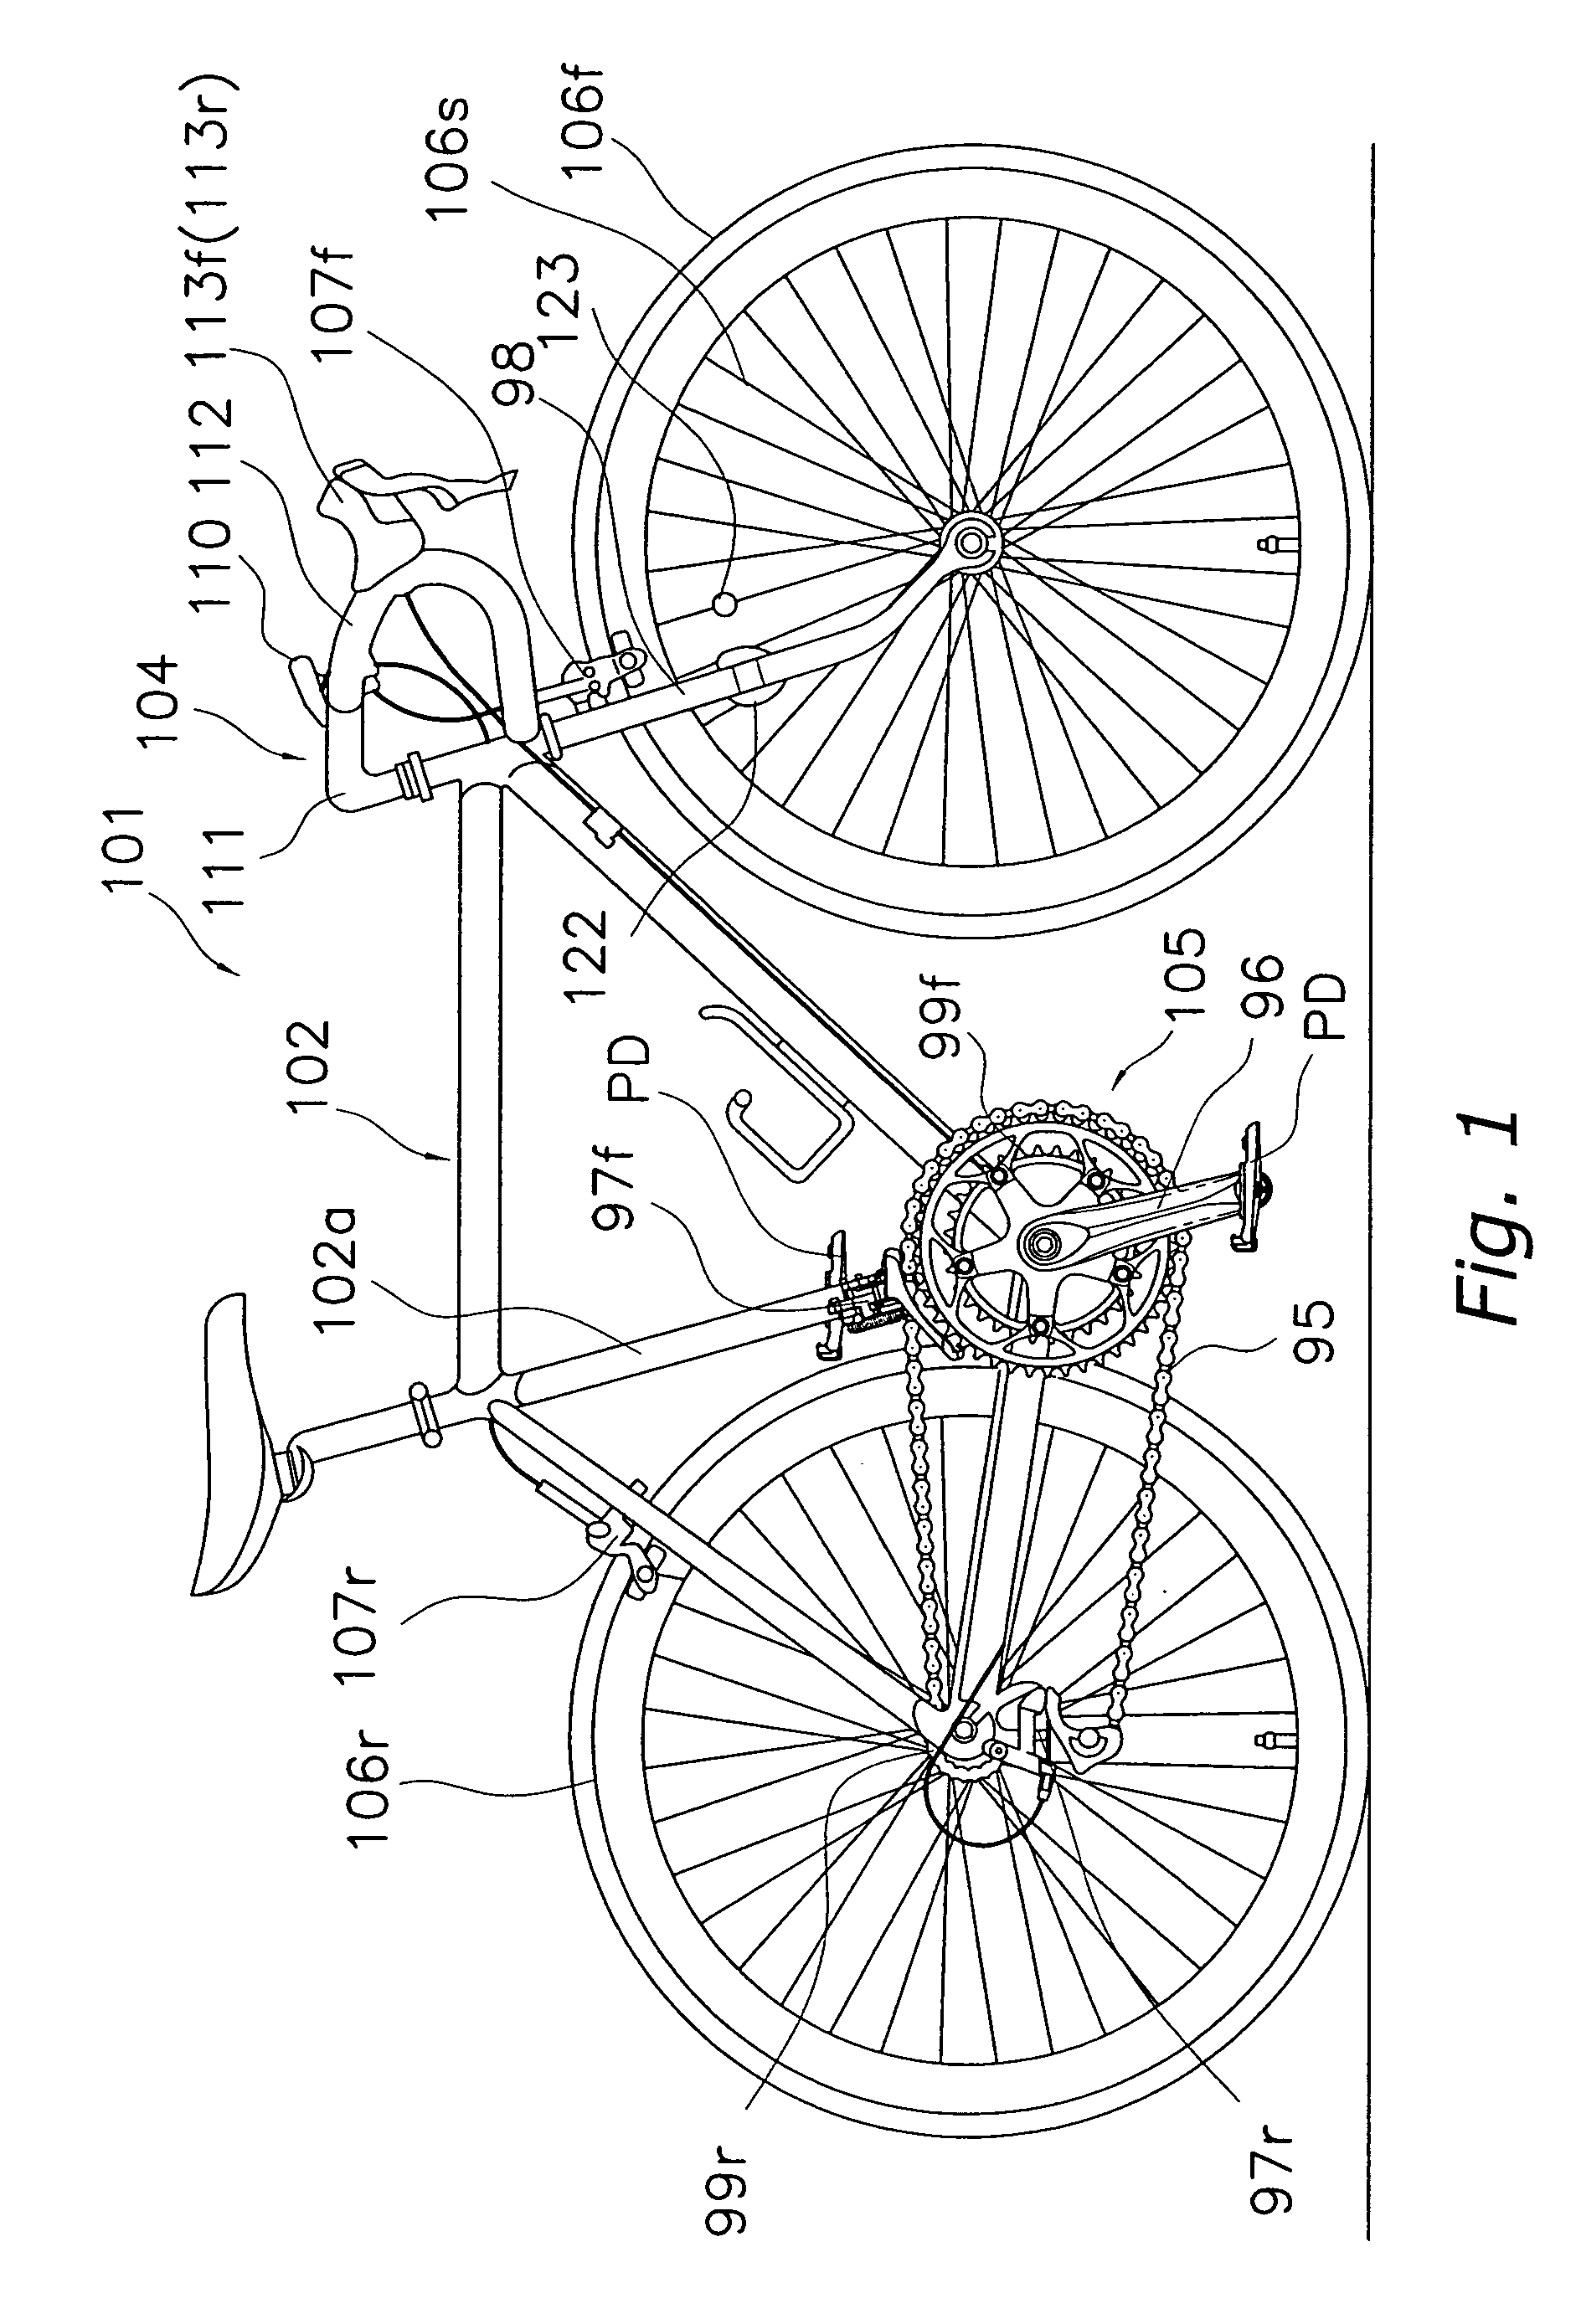 Variable speed drive device for bicycle